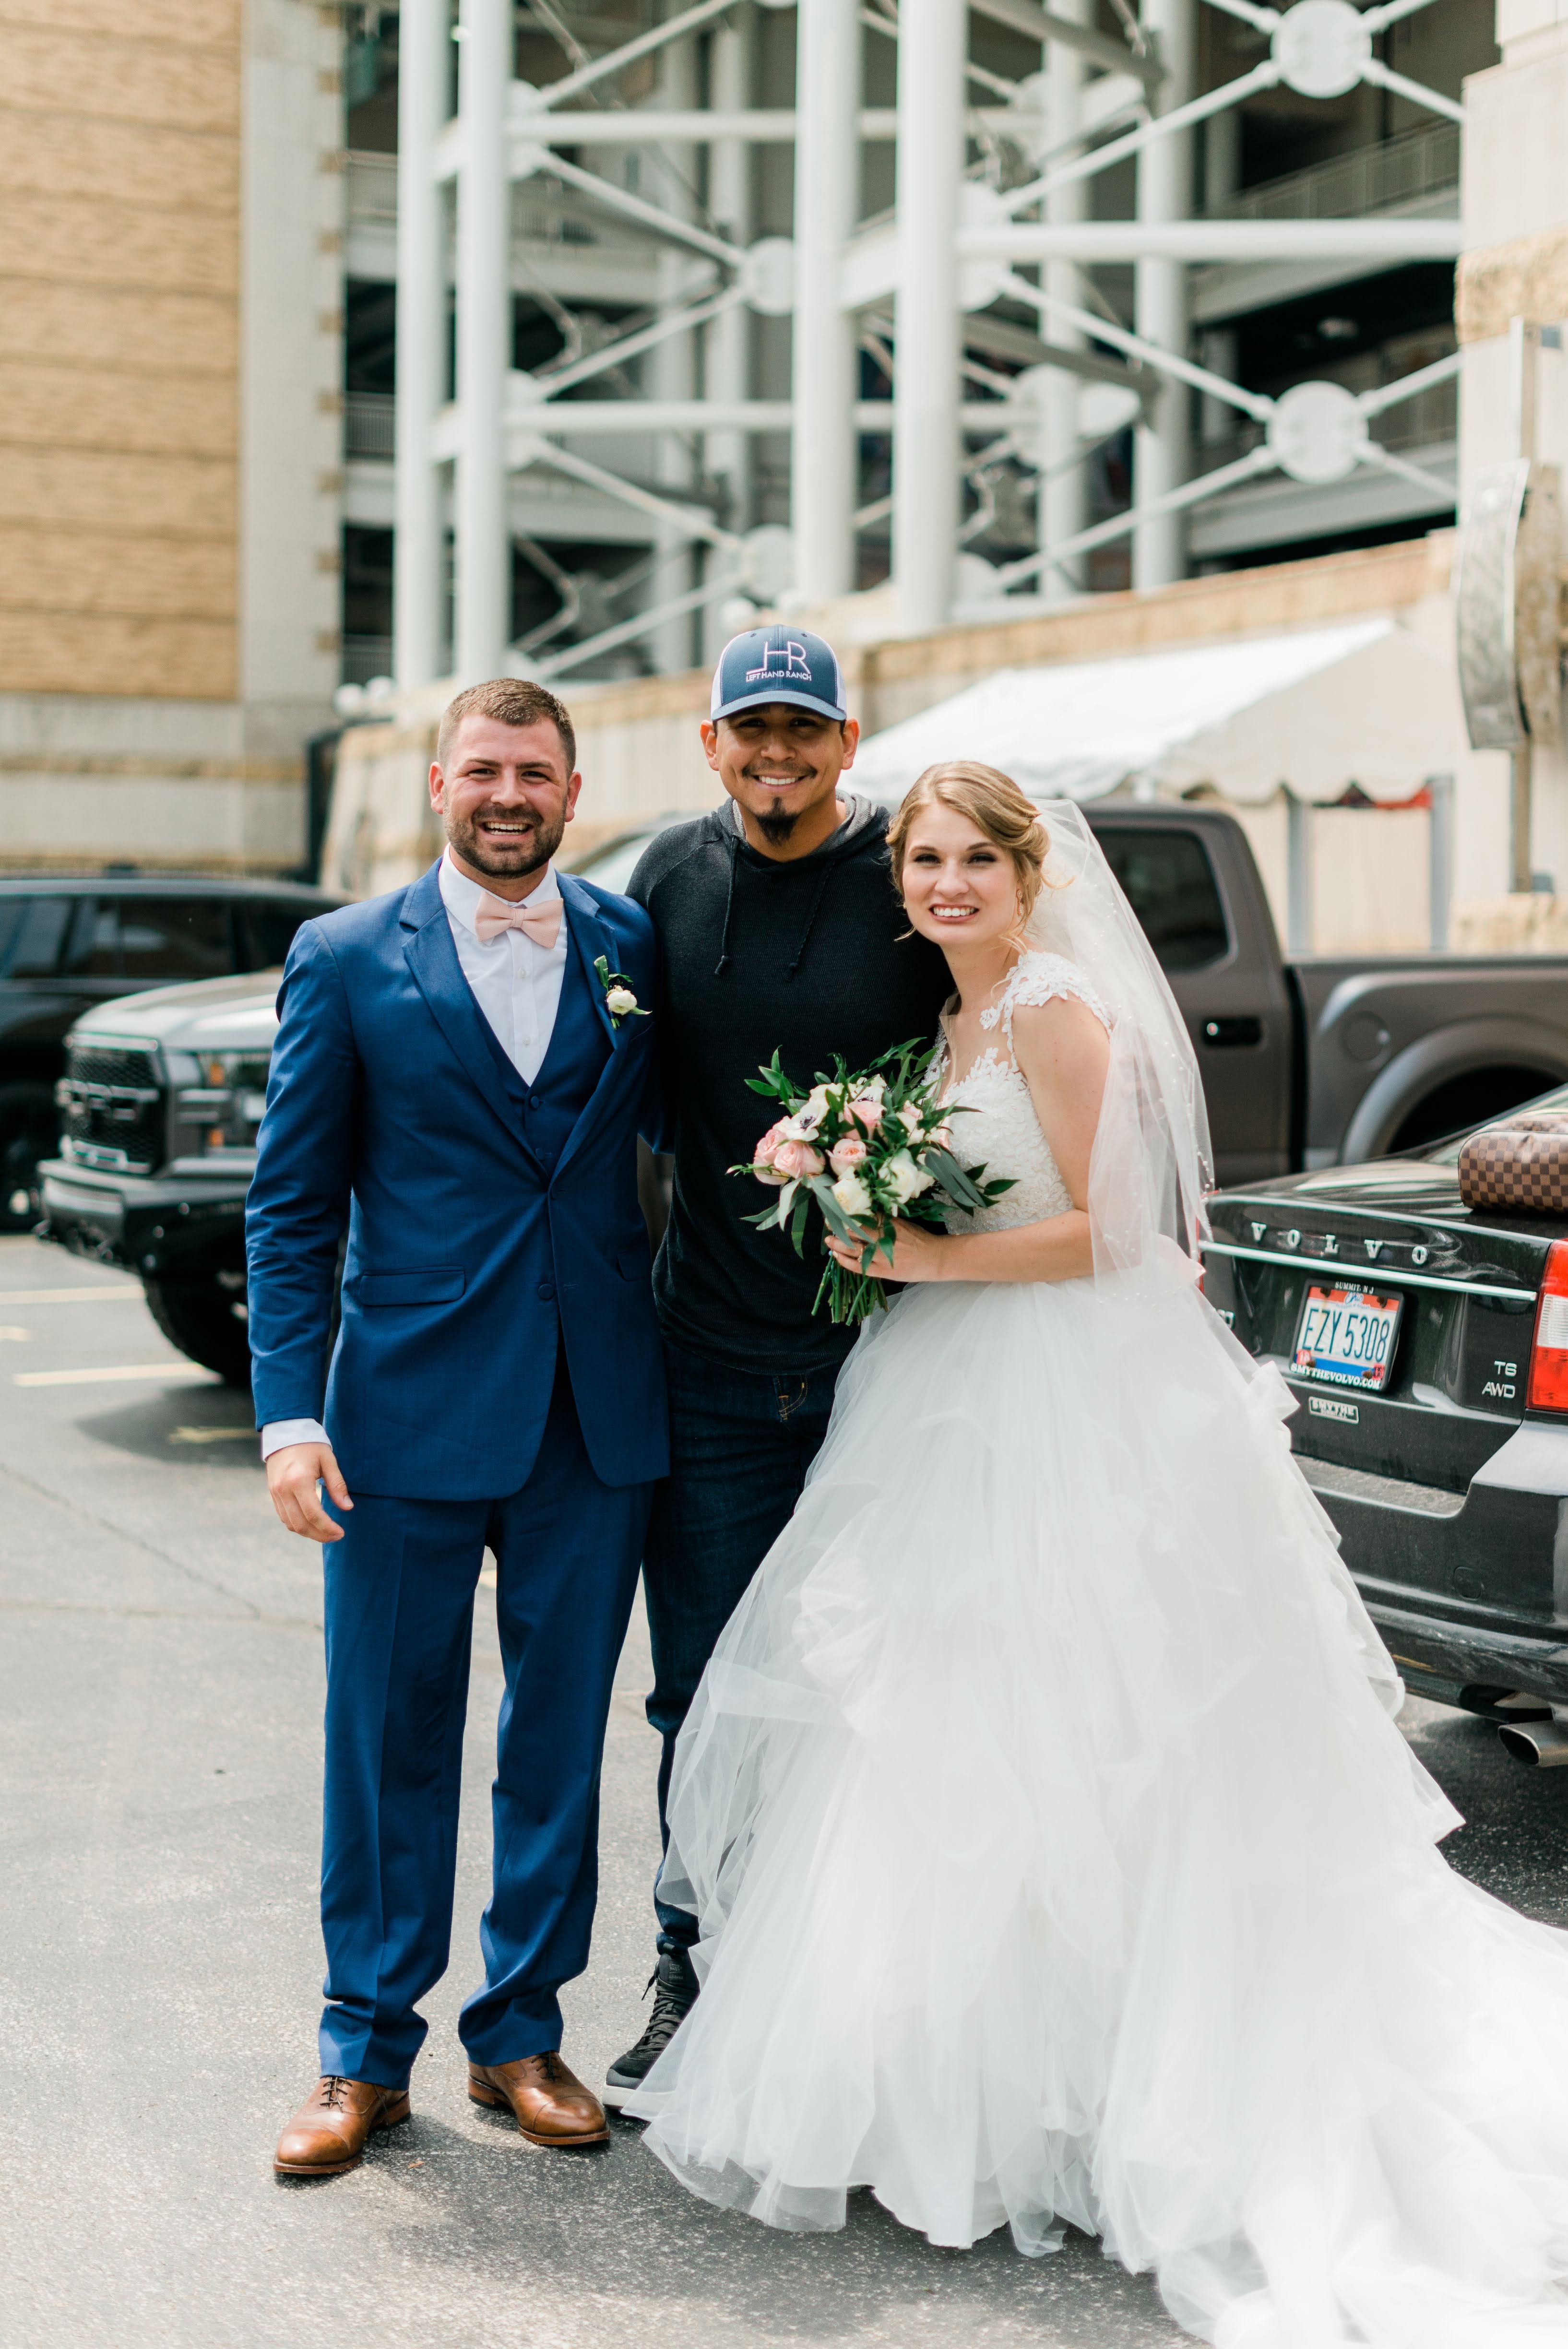 Cleveland Indians Francisco Lindor and Carlos Carrasco crash wedding  pictures at Progressive Field, by Cleveland Guardians